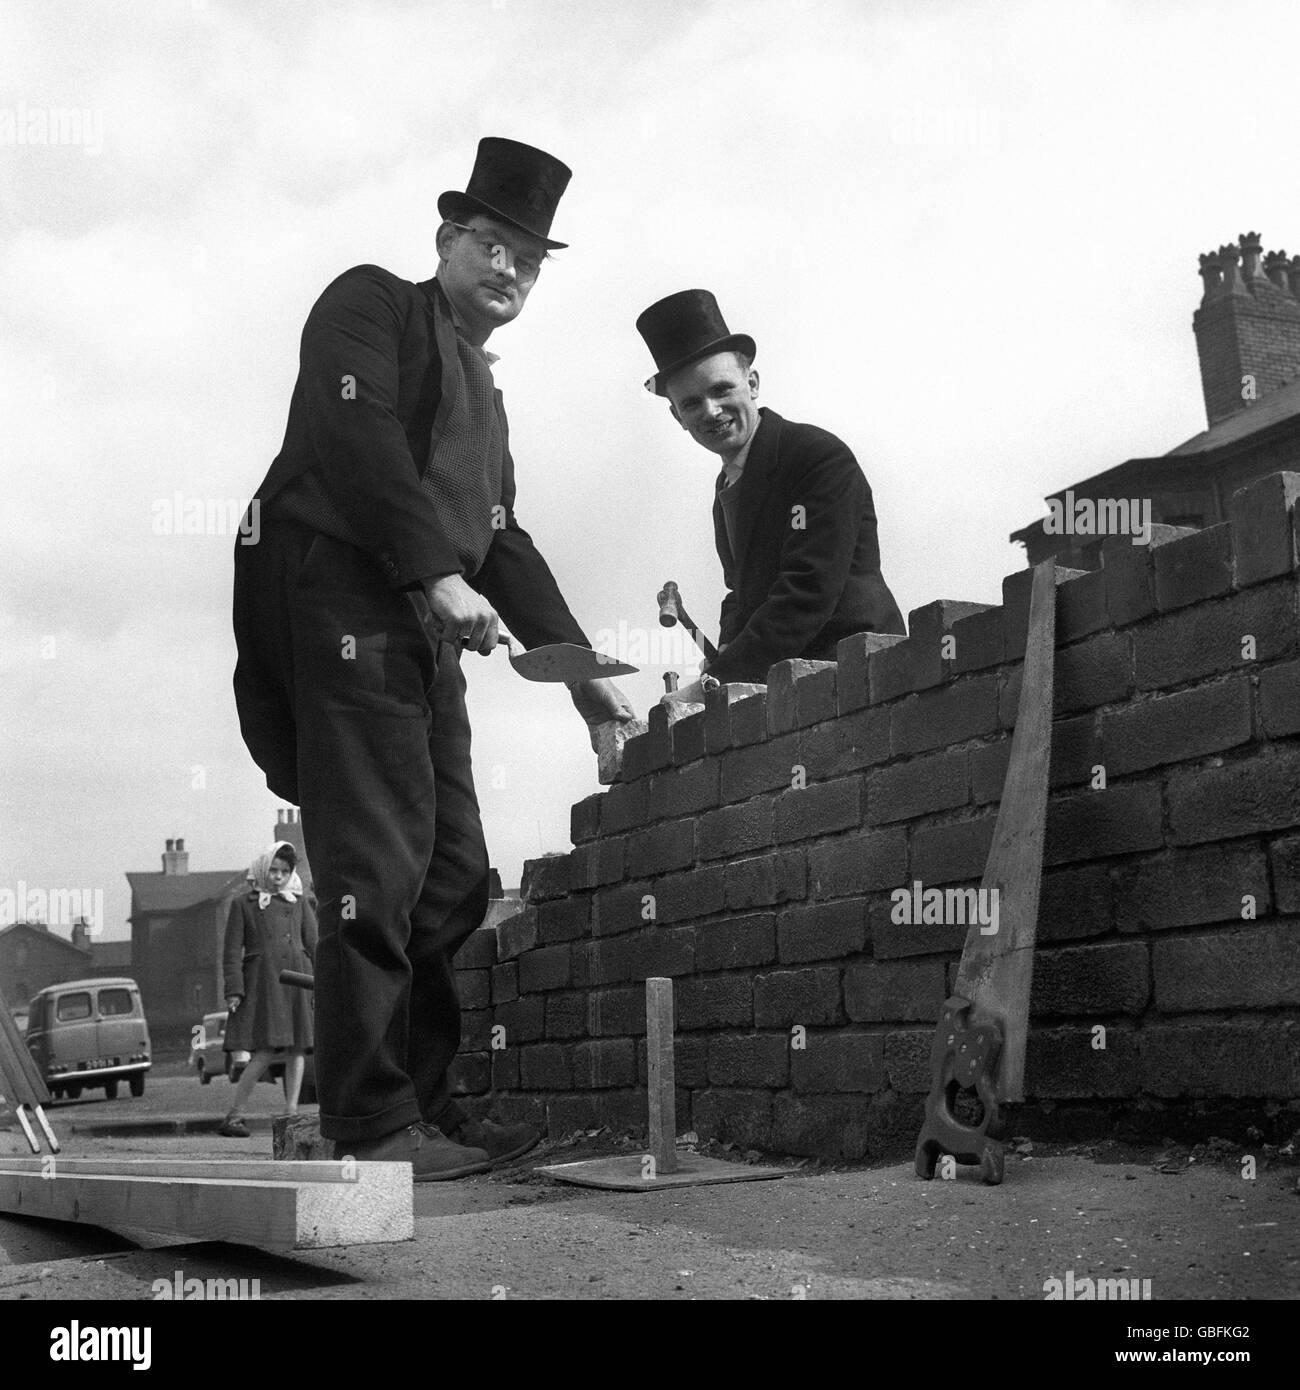 Wearing top hats and tails as they build a wall in Manchester are Malcolm West, 31, of Levenshulme, Manchester (left) and Colin Whittaker, 26, of Edgeley, Stockport, who run their own building business. Stock Photo